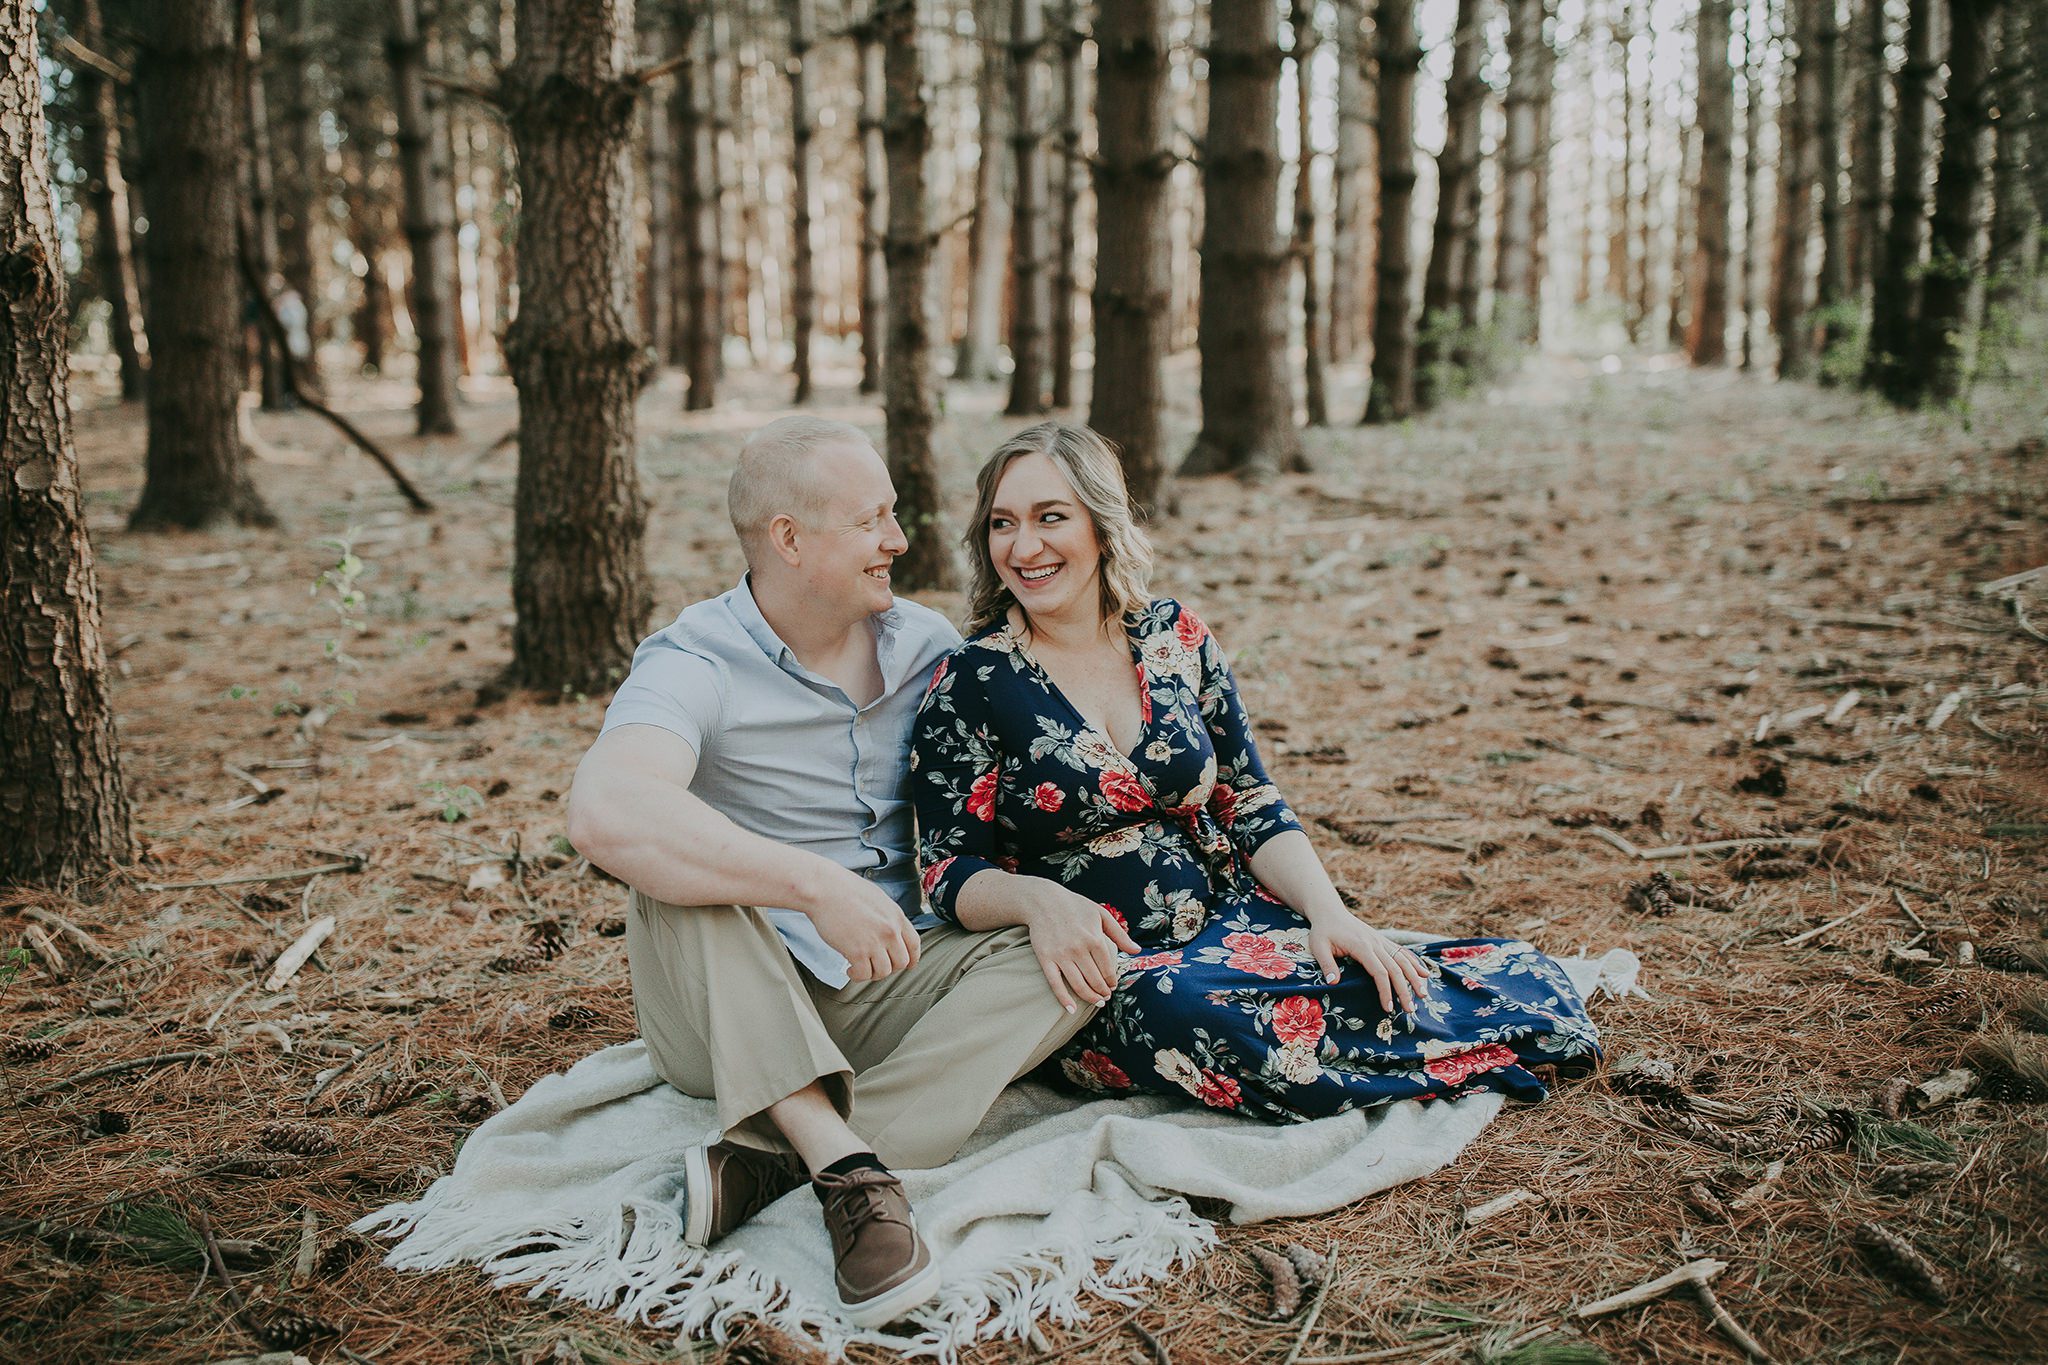 Kansas City Maternity photographer outdoor with trees in forest